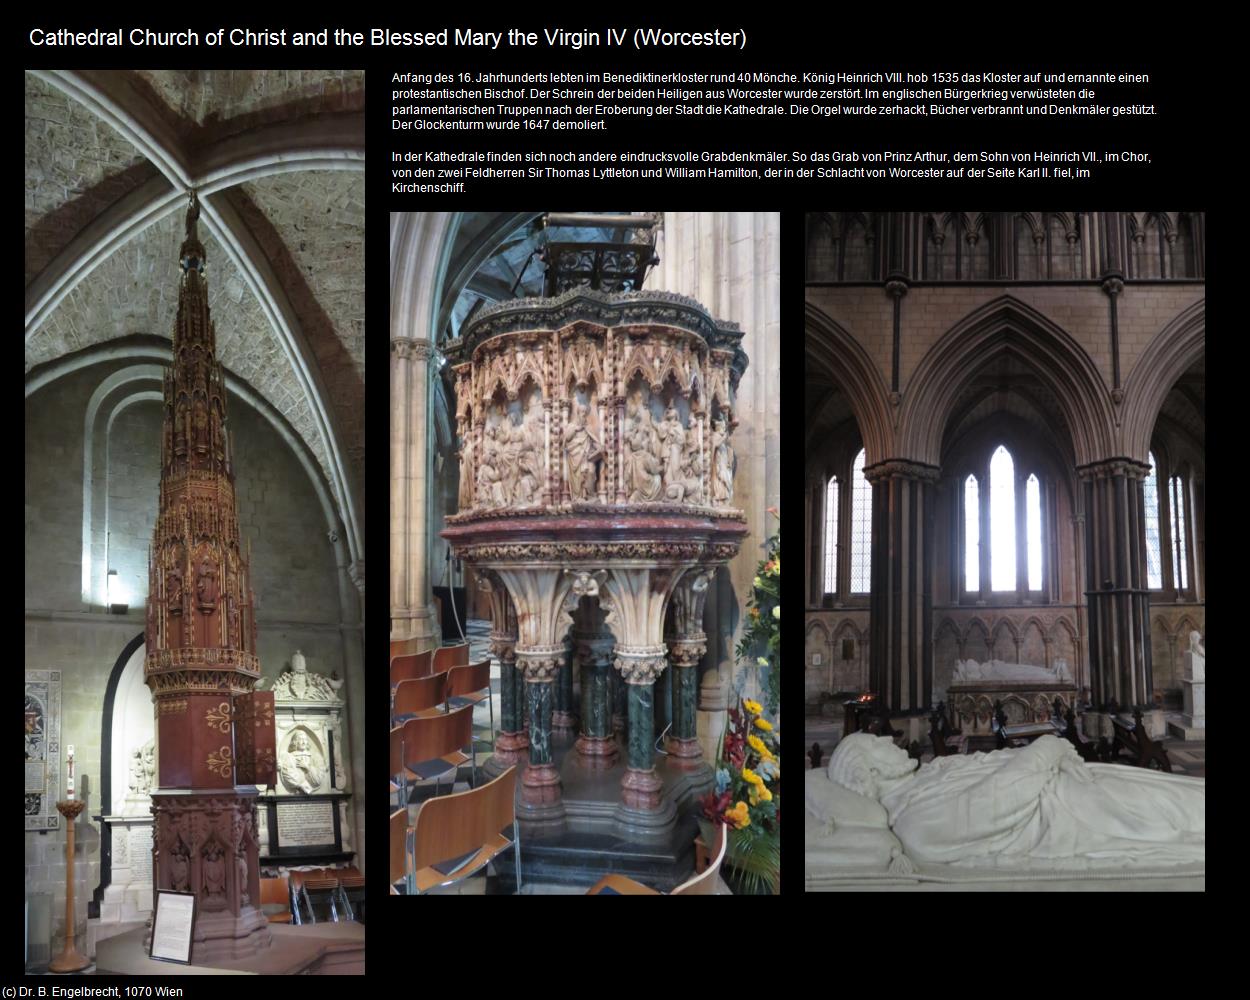 Cathedral Church of Christ and the Blessed Mary the Virgin IV  (Worcester, England) in Kulturatlas-ENGLAND und WALES